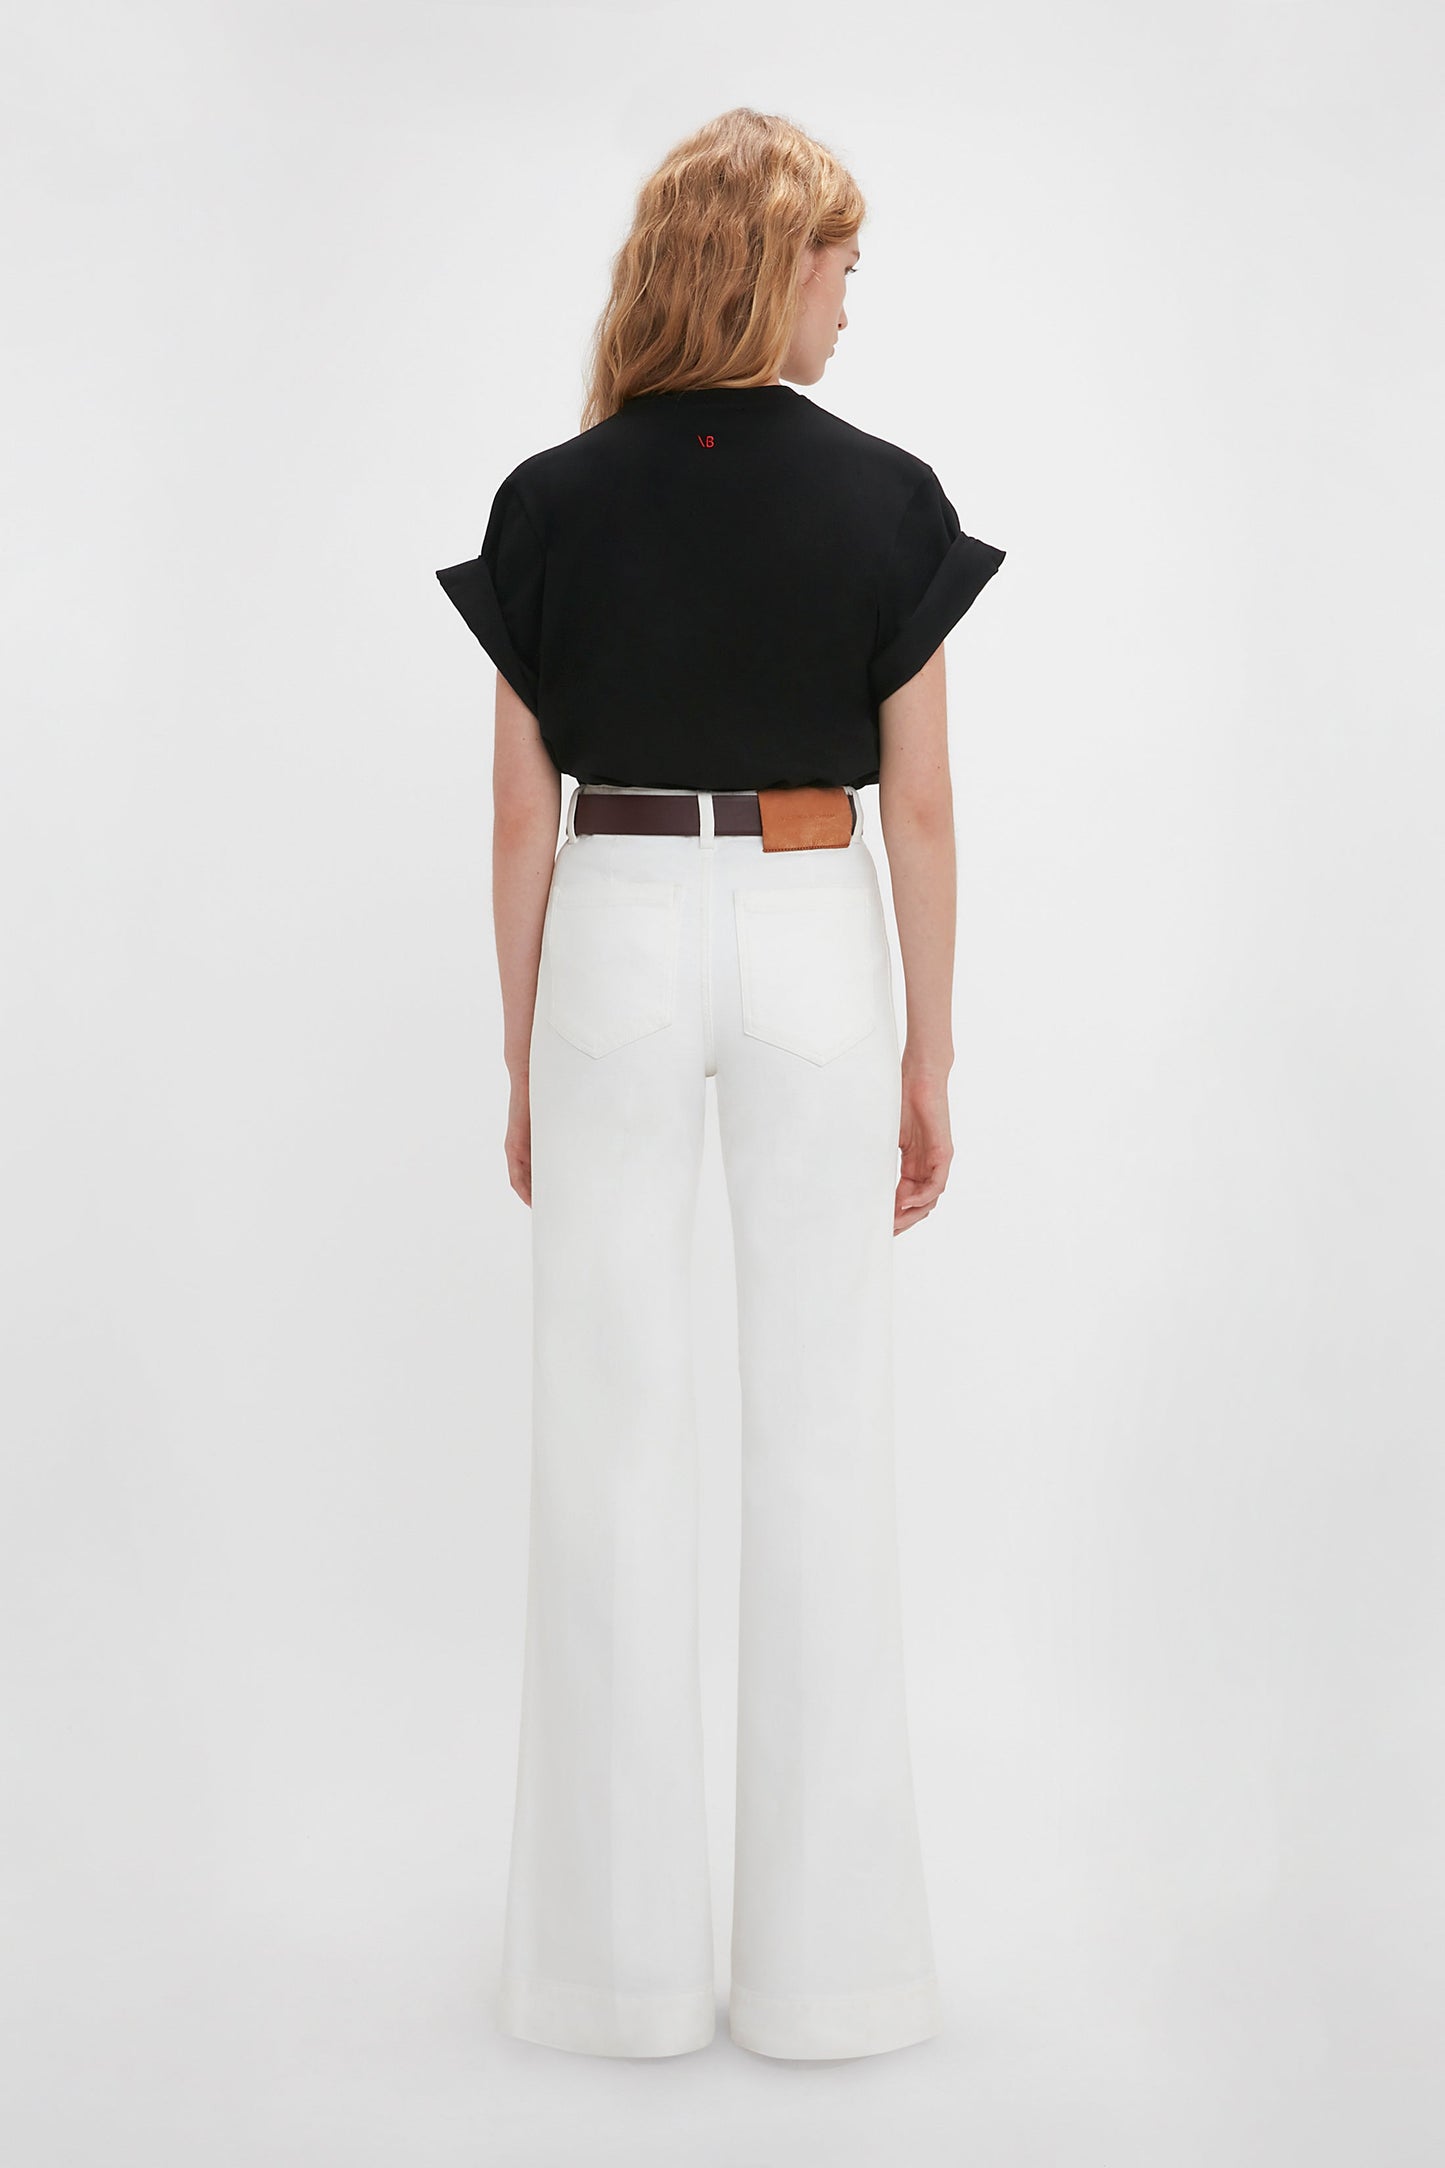 Woman in a Victoria Beckham 'Do As I Say, Not As I Do' Slogan T-Shirt in Black and white wide-leg pants, standing with her back to the camera against a plain background.